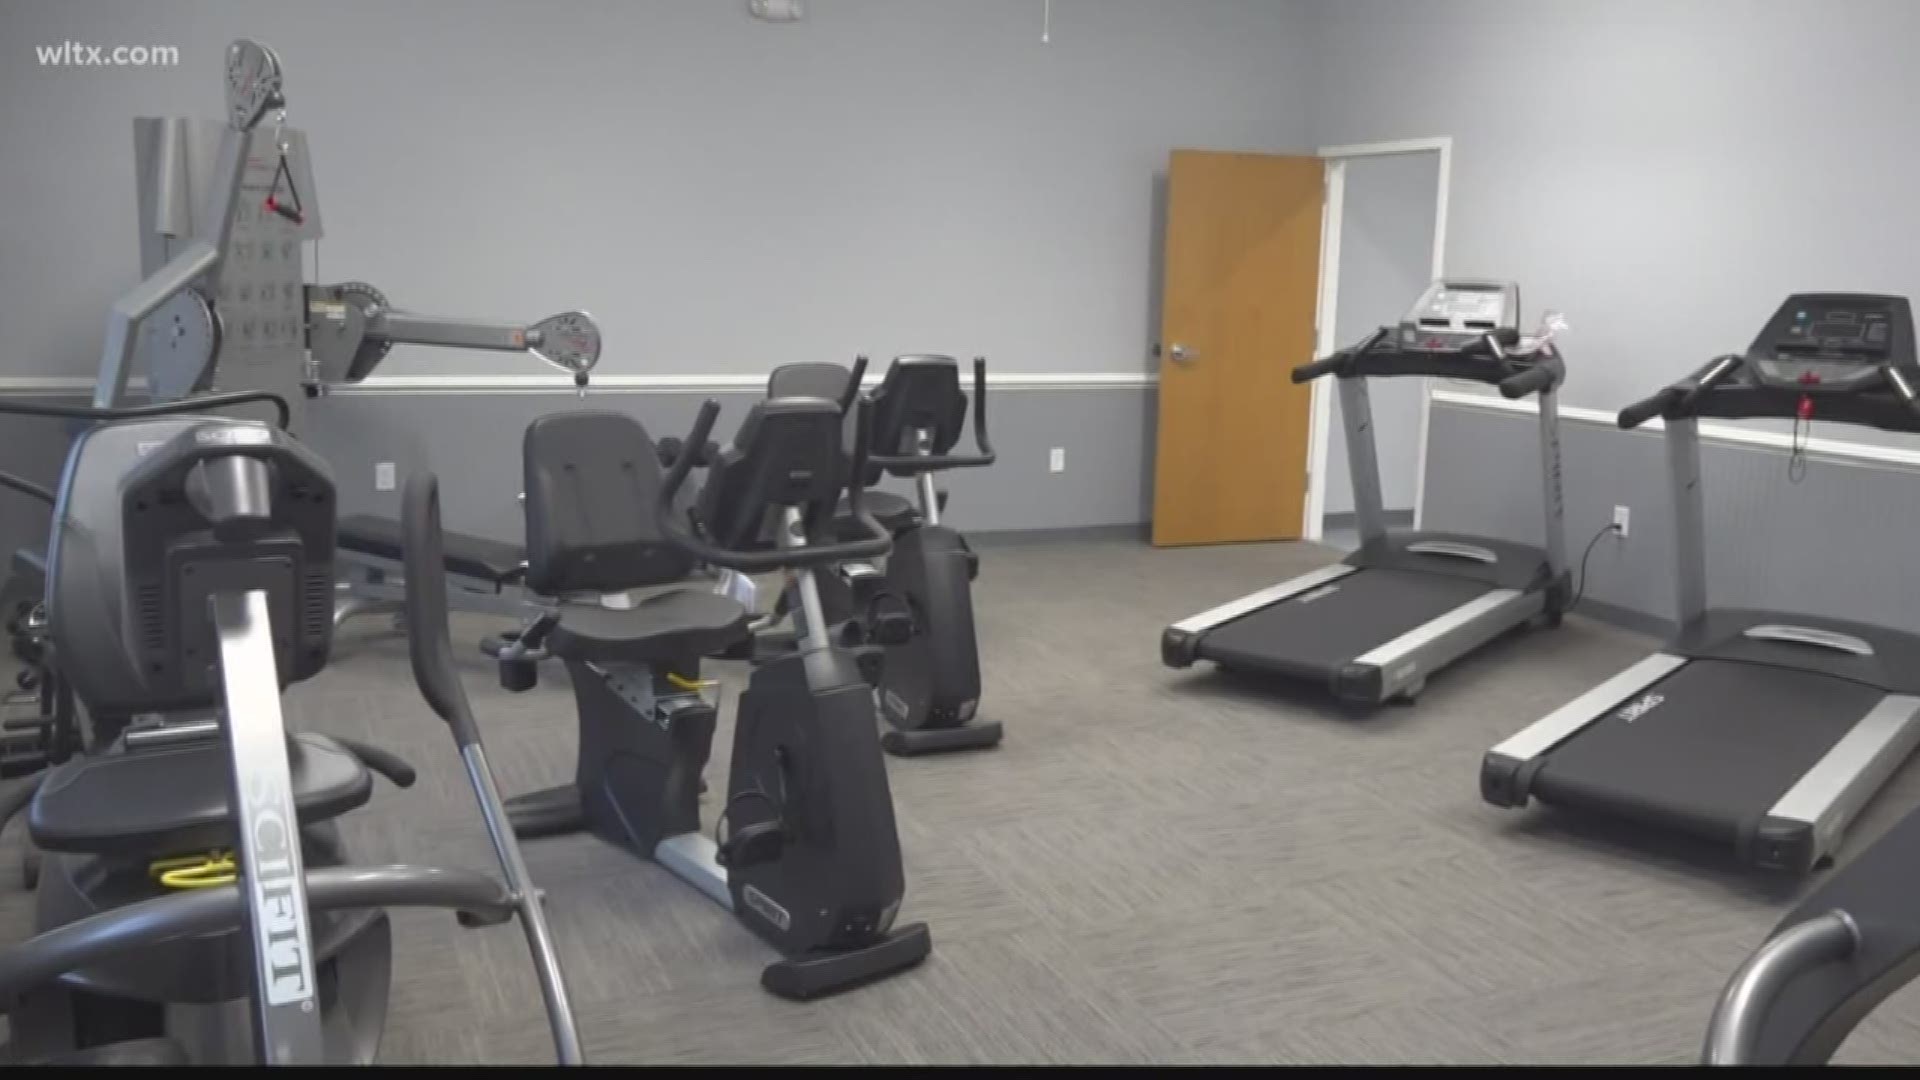 The senior leisure center in Neeses gets ready to open.